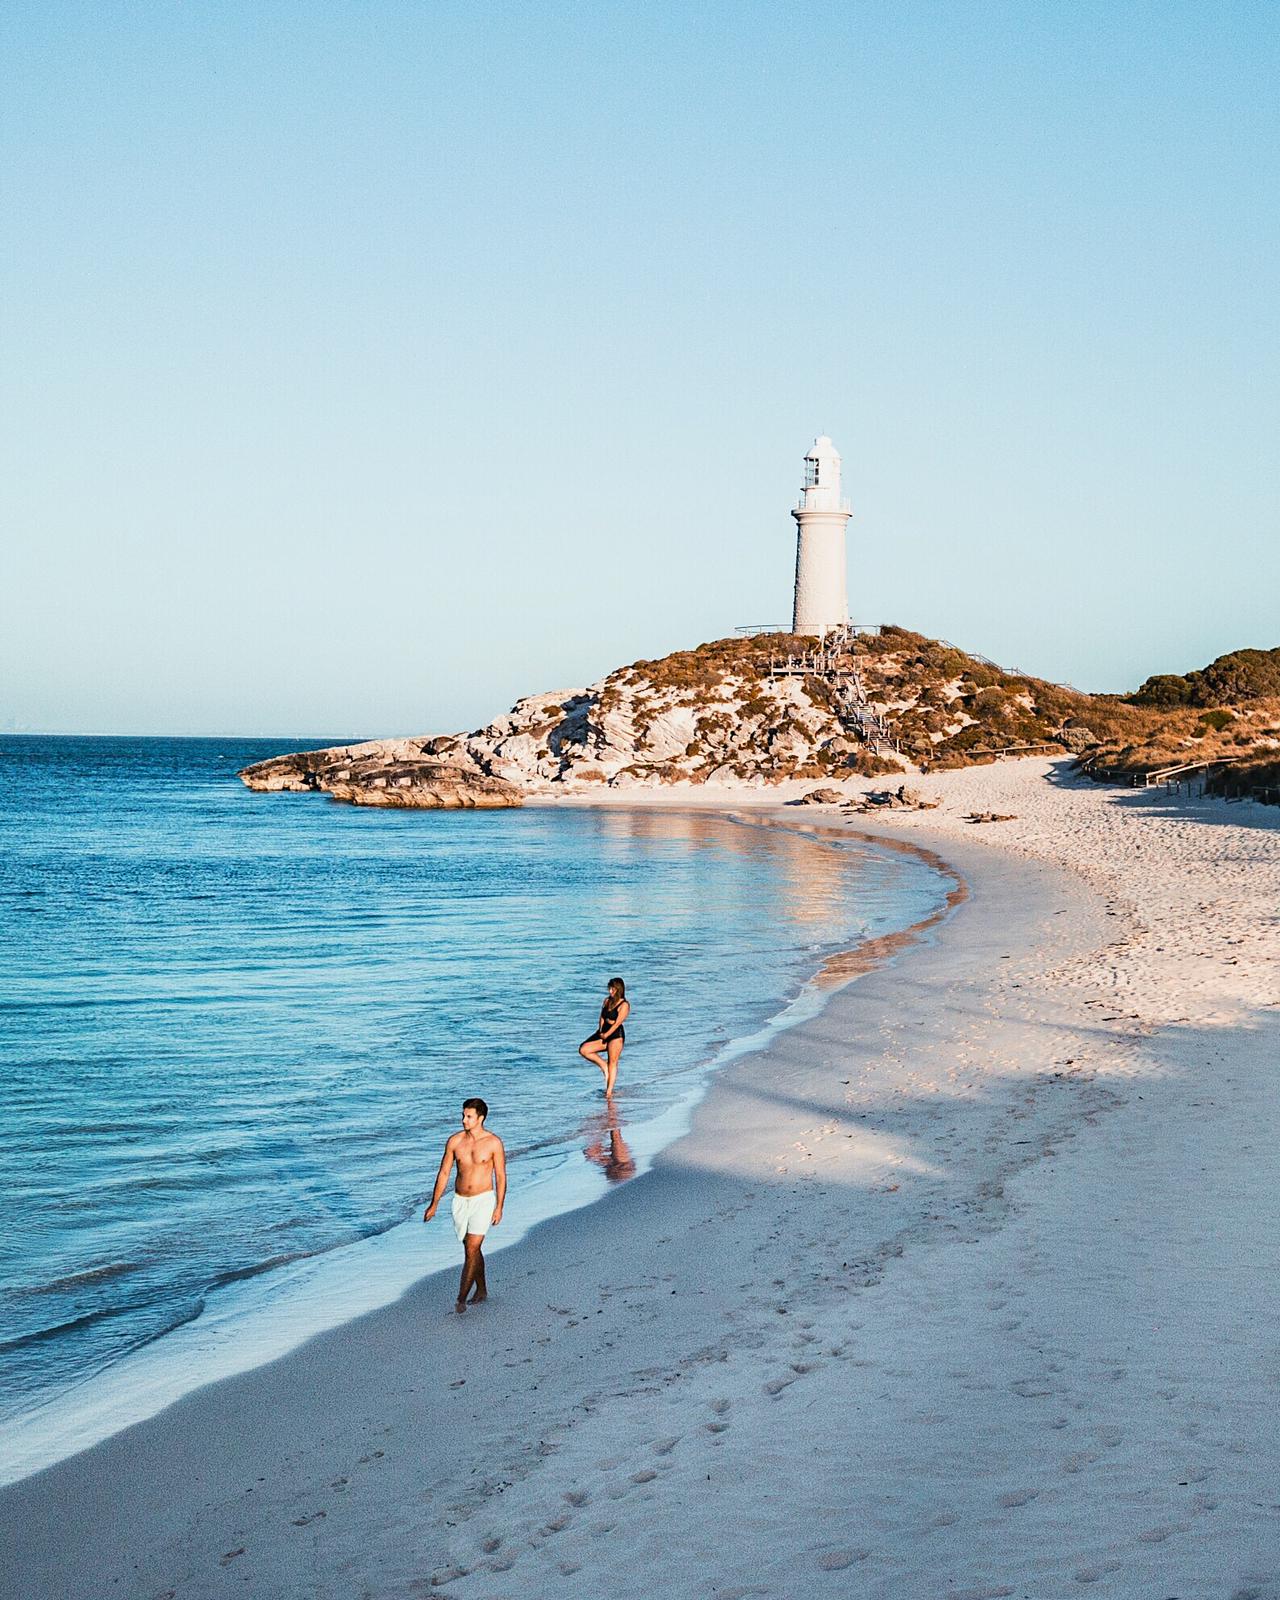 Living on Rottnest Island - Our Journey - Unexplored Footsteps